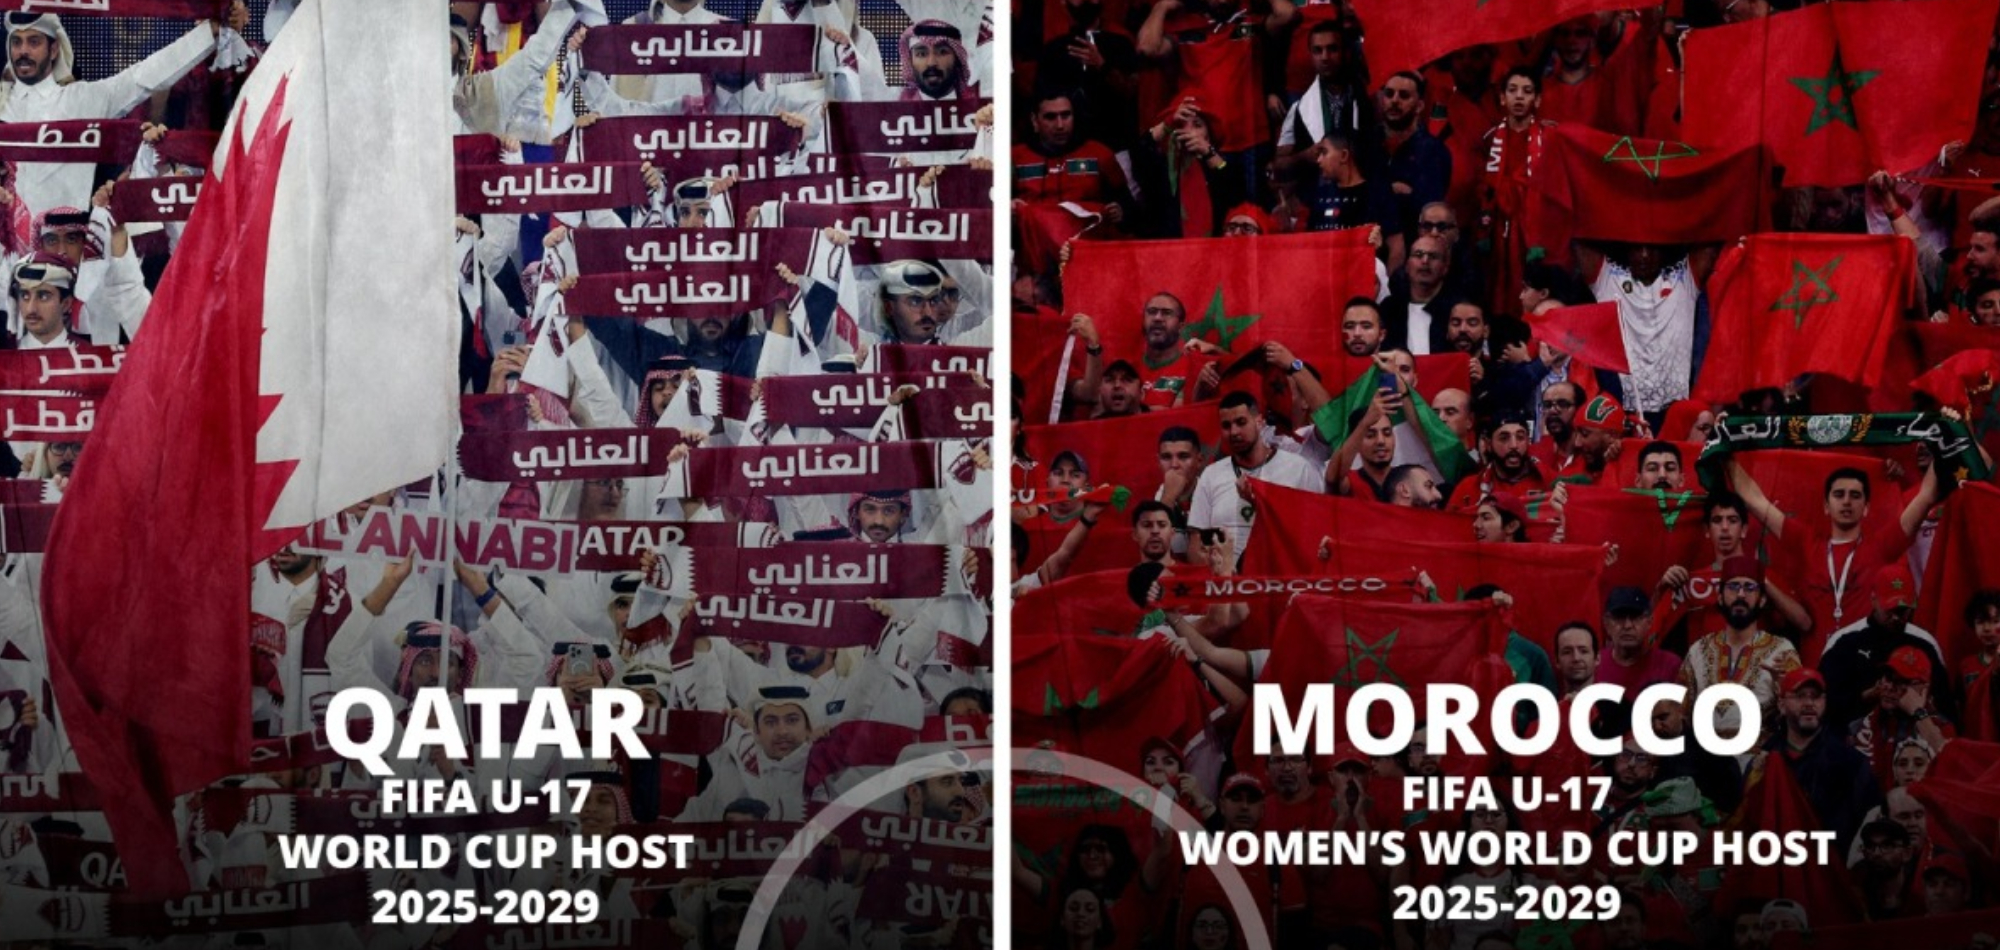 Qatar, Morocco to host FIFA U-17 World Cups for next five years